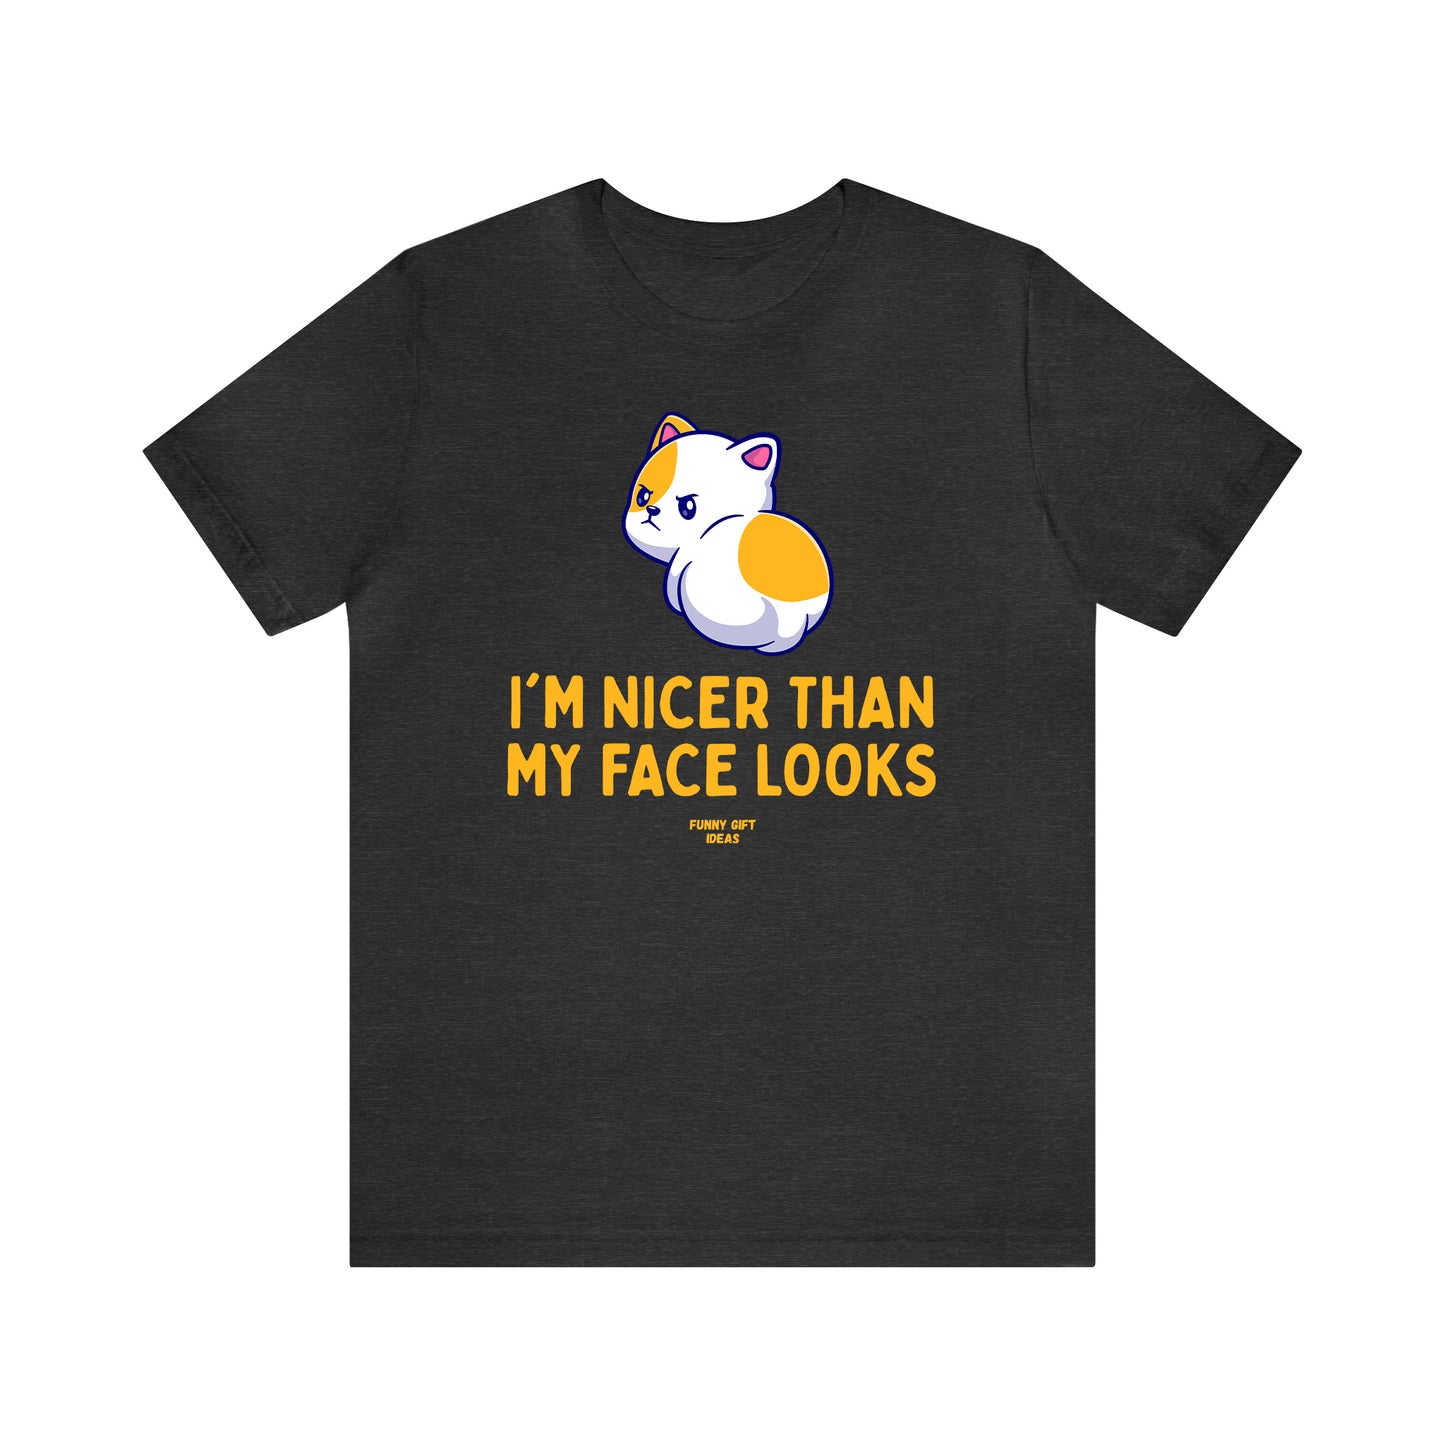 Funny Shirts for Women - I'm Nicer Than My Face Looks - Women's T Shirts